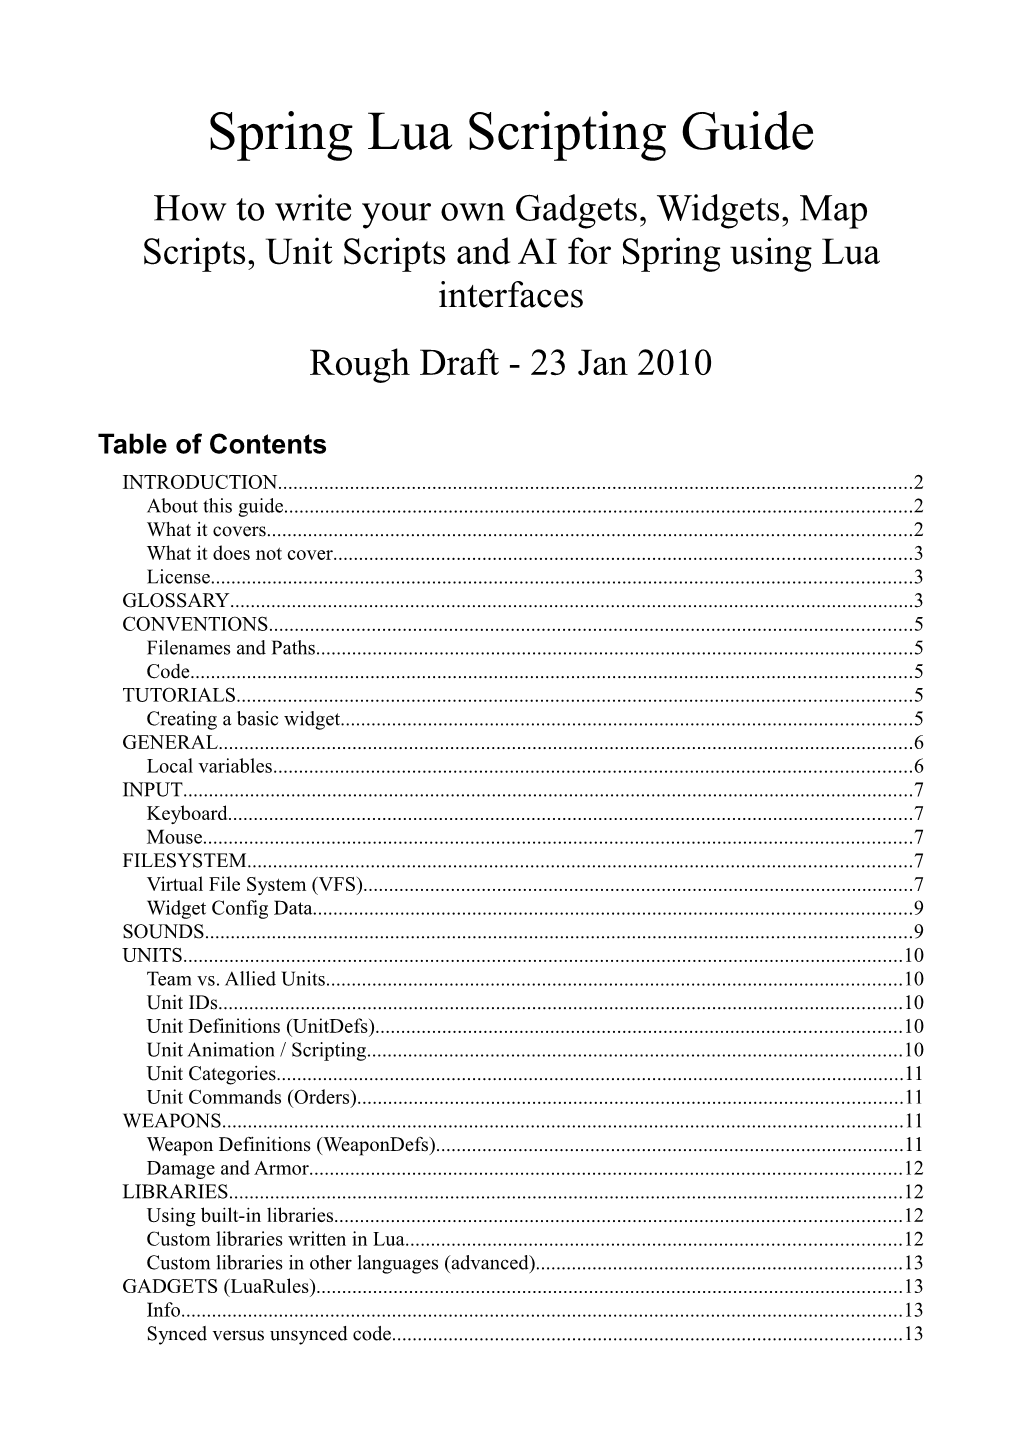 Spring Lua Scripting Guide How to Write Your Own Gadgets, Widgets, Map Scripts, Unit Scripts and AI for Spring Using Lua Interfaces Rough Draft - 23 Jan 2010